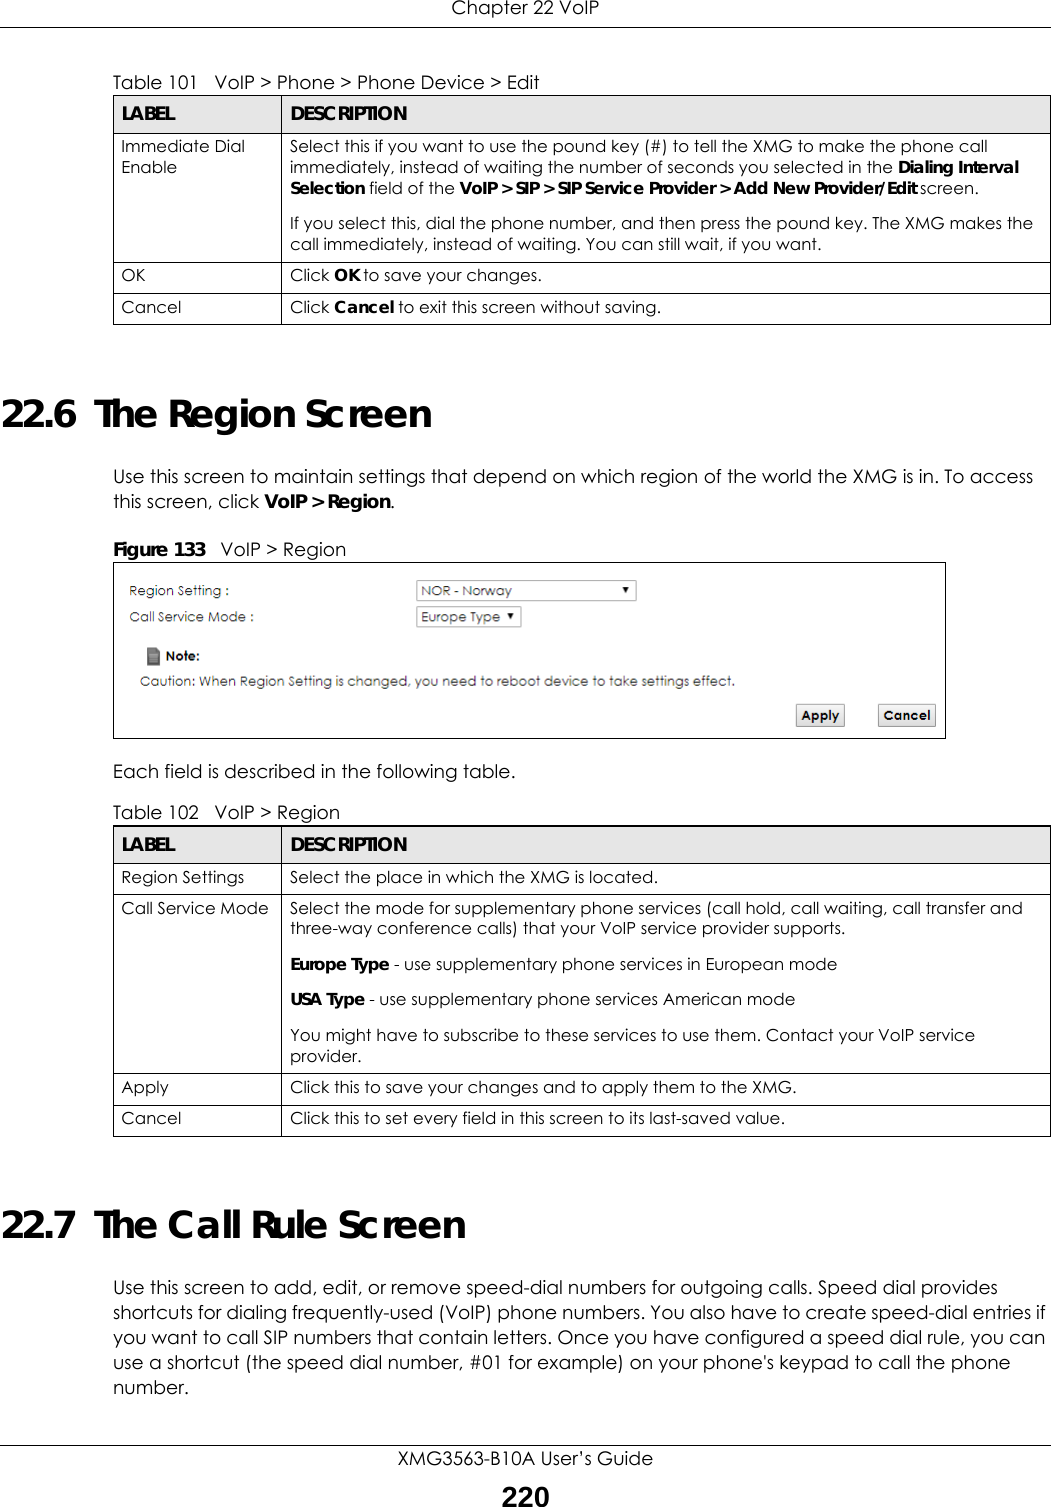 Chapter 22 VoIPXMG3563-B10A User’s Guide22022.6  The Region Screen Use this screen to maintain settings that depend on which region of the world the XMG is in. To access this screen, click VoIP &gt; Region.Figure 133   VoIP &gt; Region Each field is described in the following table.22.7  The Call Rule ScreenUse this screen to add, edit, or remove speed-dial numbers for outgoing calls. Speed dial provides shortcuts for dialing frequently-used (VoIP) phone numbers. You also have to create speed-dial entries if you want to call SIP numbers that contain letters. Once you have configured a speed dial rule, you can use a shortcut (the speed dial number, #01 for example) on your phone&apos;s keypad to call the phone number.Immediate Dial EnableSelect this if you want to use the pound key (#) to tell the XMG to make the phone call immediately, instead of waiting the number of seconds you selected in the Dialing Interval Selection field of the VoIP &gt; SIP &gt; SIP Service Provider &gt; Add New Provider/Edit screen.If you select this, dial the phone number, and then press the pound key. The XMG makes the call immediately, instead of waiting. You can still wait, if you want.OK Click OK to save your changes.Cancel Click Cancel to exit this screen without saving.Table 101   VoIP &gt; Phone &gt; Phone Device &gt; EditLABEL DESCRIPTIONTable 102   VoIP &gt; RegionLABEL DESCRIPTIONRegion Settings Select the place in which the XMG is located.Call Service Mode Select the mode for supplementary phone services (call hold, call waiting, call transfer and three-way conference calls) that your VoIP service provider supports.Europe Type - use supplementary phone services in European modeUSA Type - use supplementary phone services American modeYou might have to subscribe to these services to use them. Contact your VoIP service provider.Apply Click this to save your changes and to apply them to the XMG.Cancel Click this to set every field in this screen to its last-saved value.